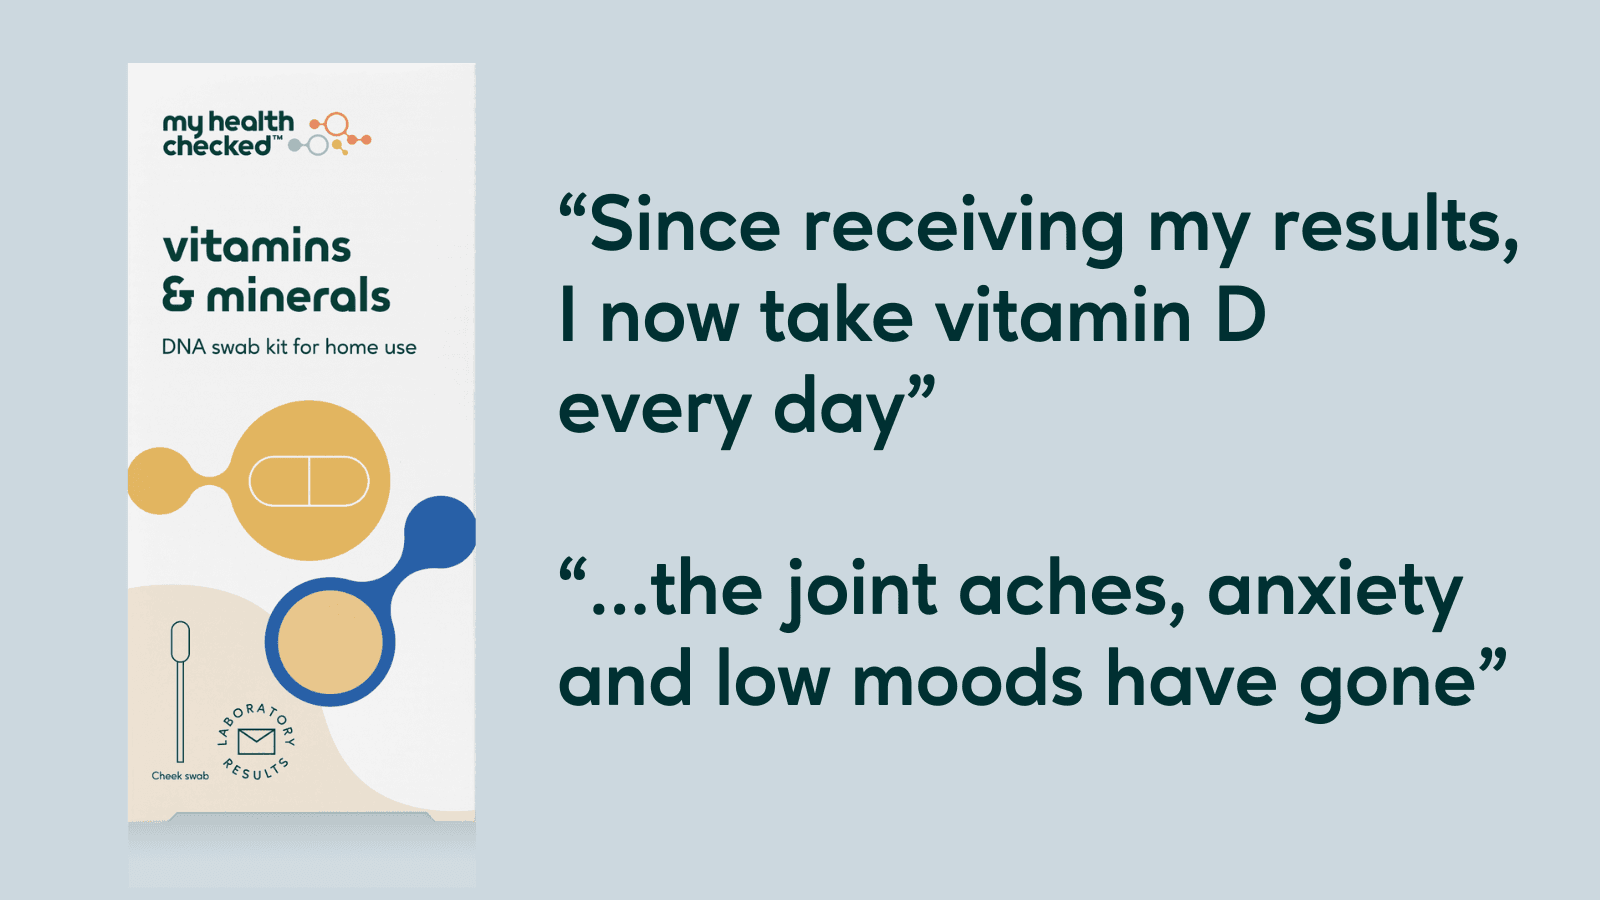 “The joint aches, anxiety and low moods have gone”